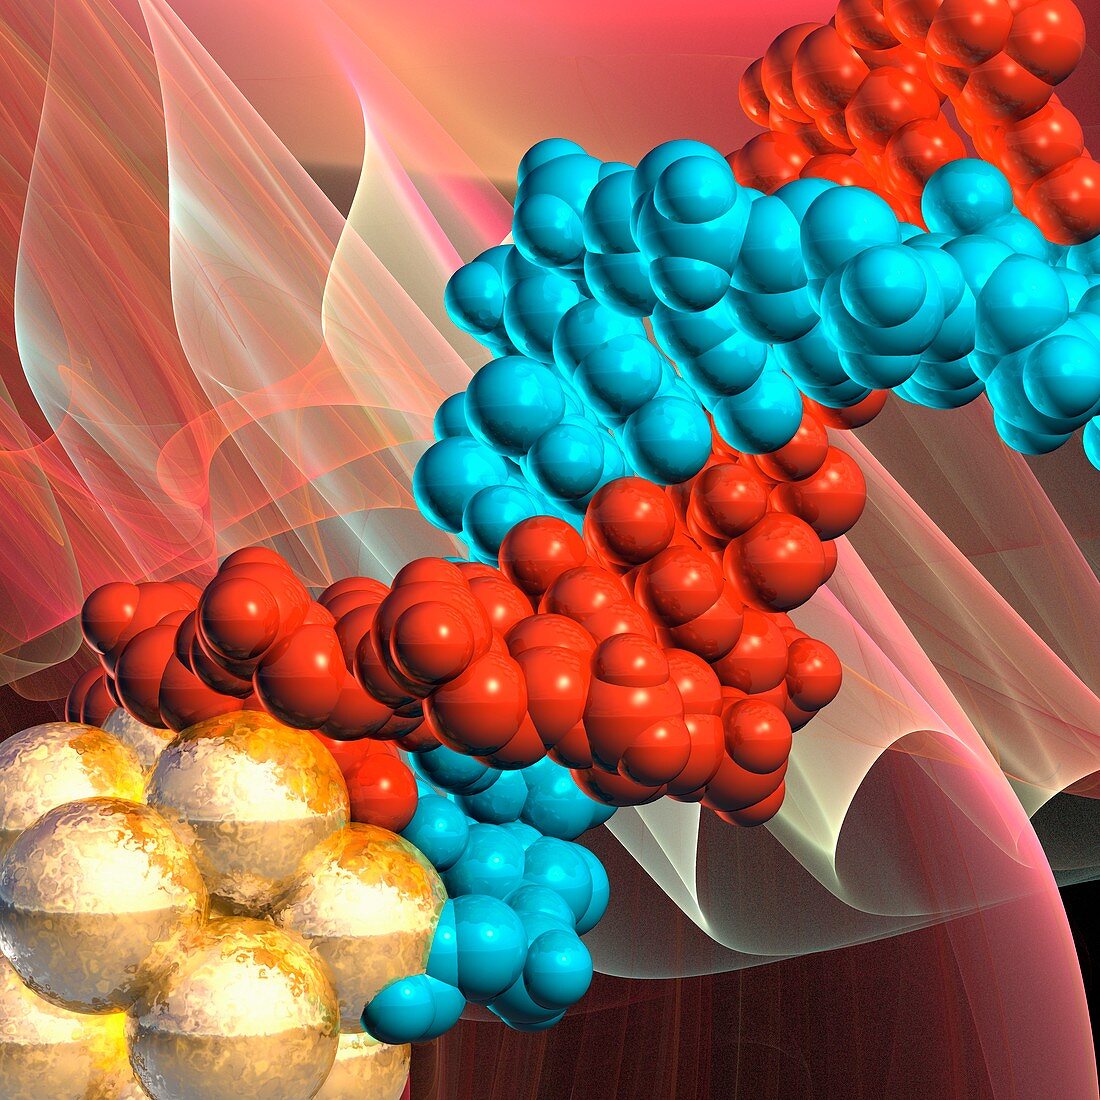 Cell cluster and DNA molecule, illustration